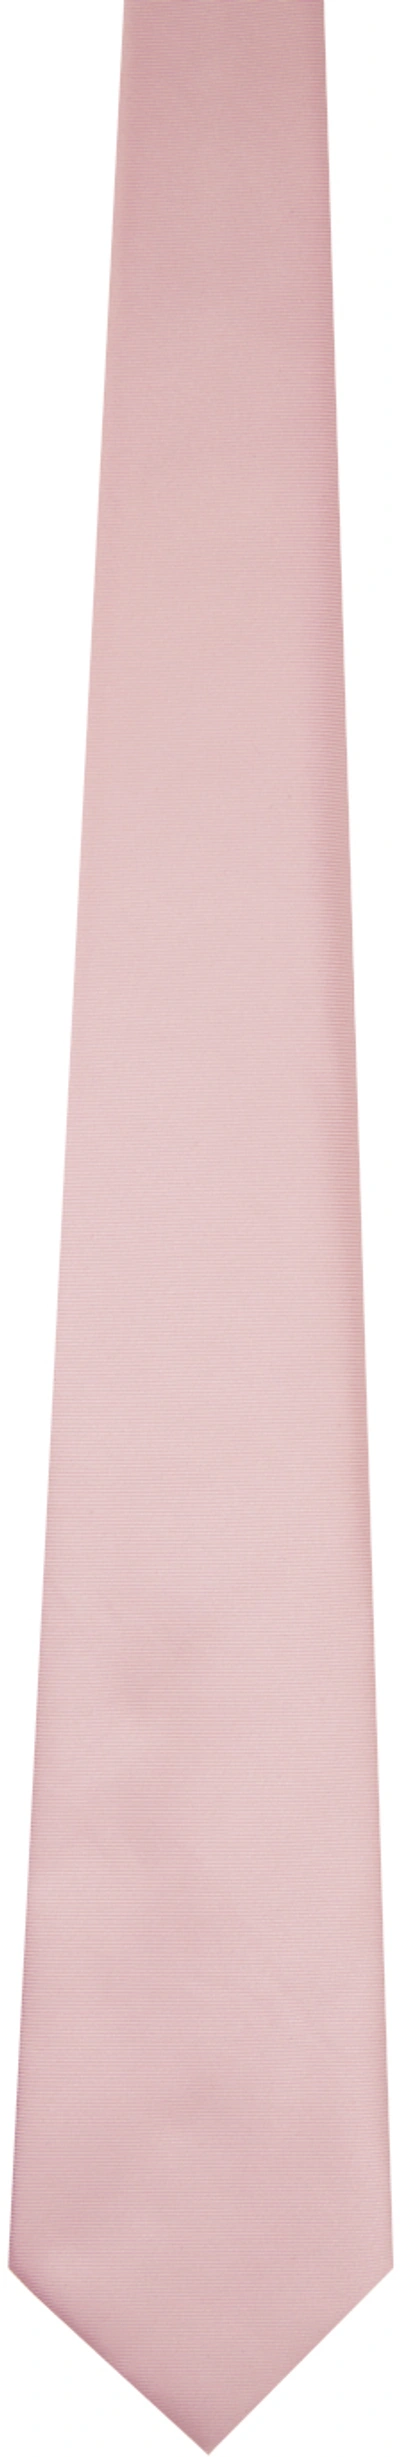 Tom Ford Pink Solid Twill Tie In Light Rose